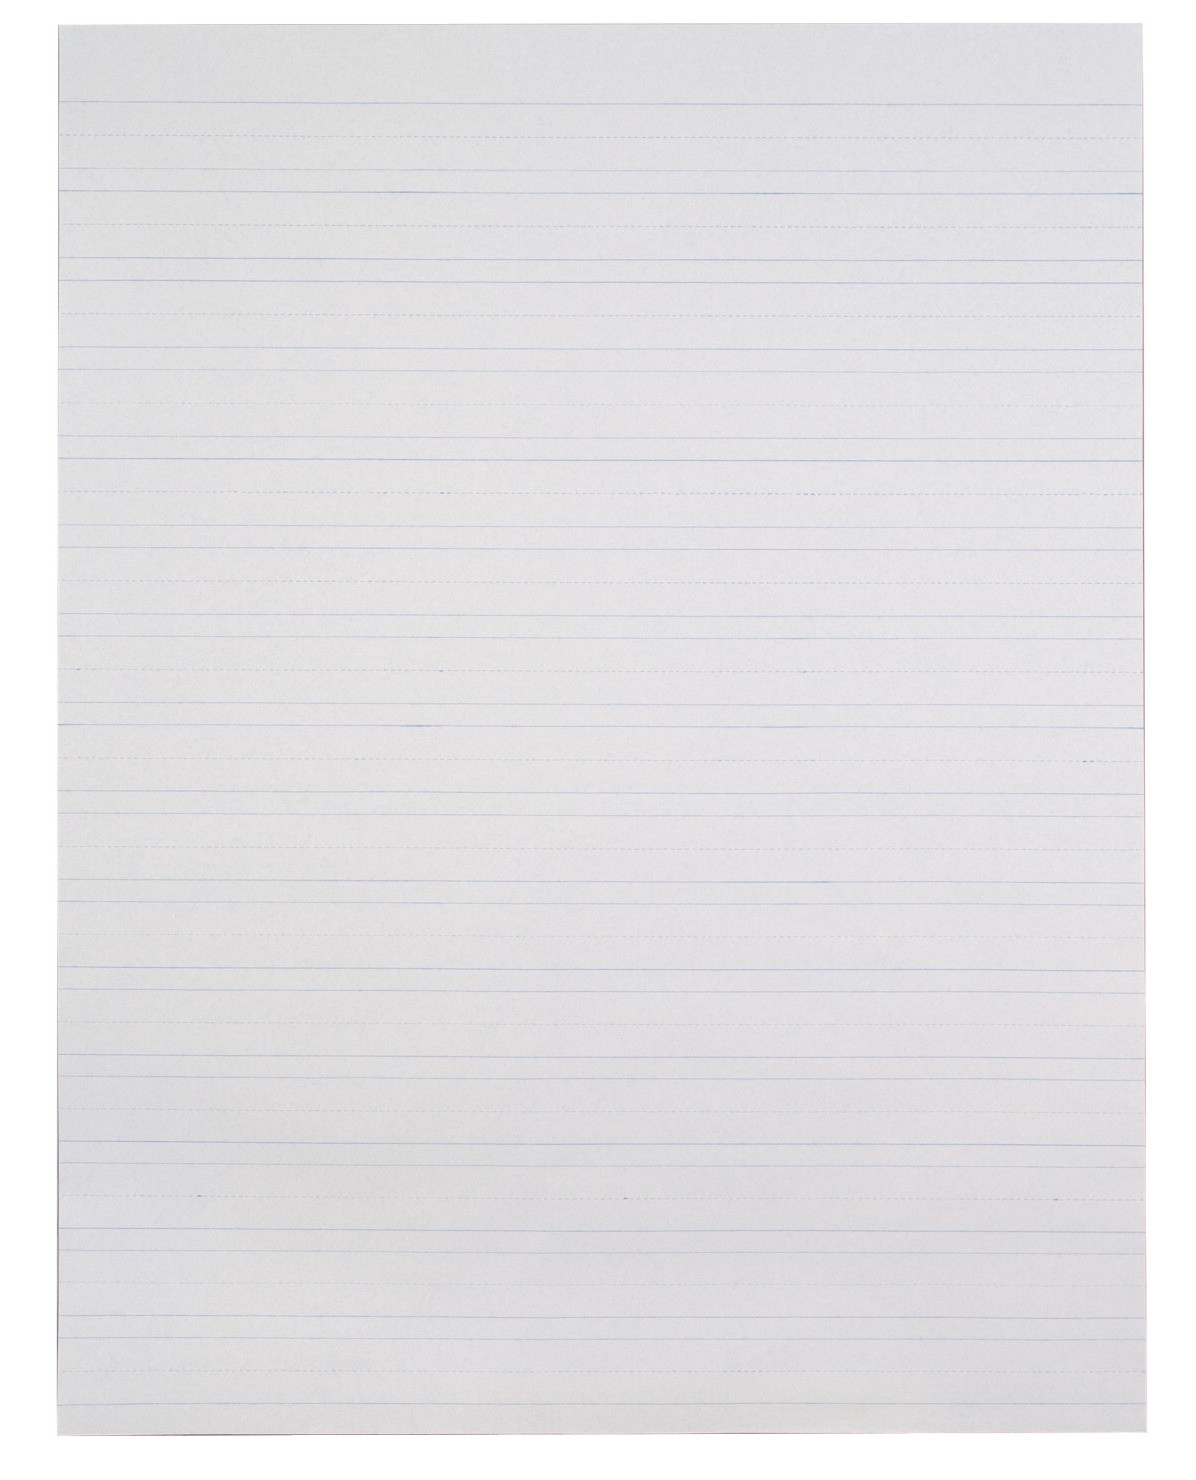 24 X 32 Primary Chart Paper Pad, White, 1" Ruled, 70 Sheets